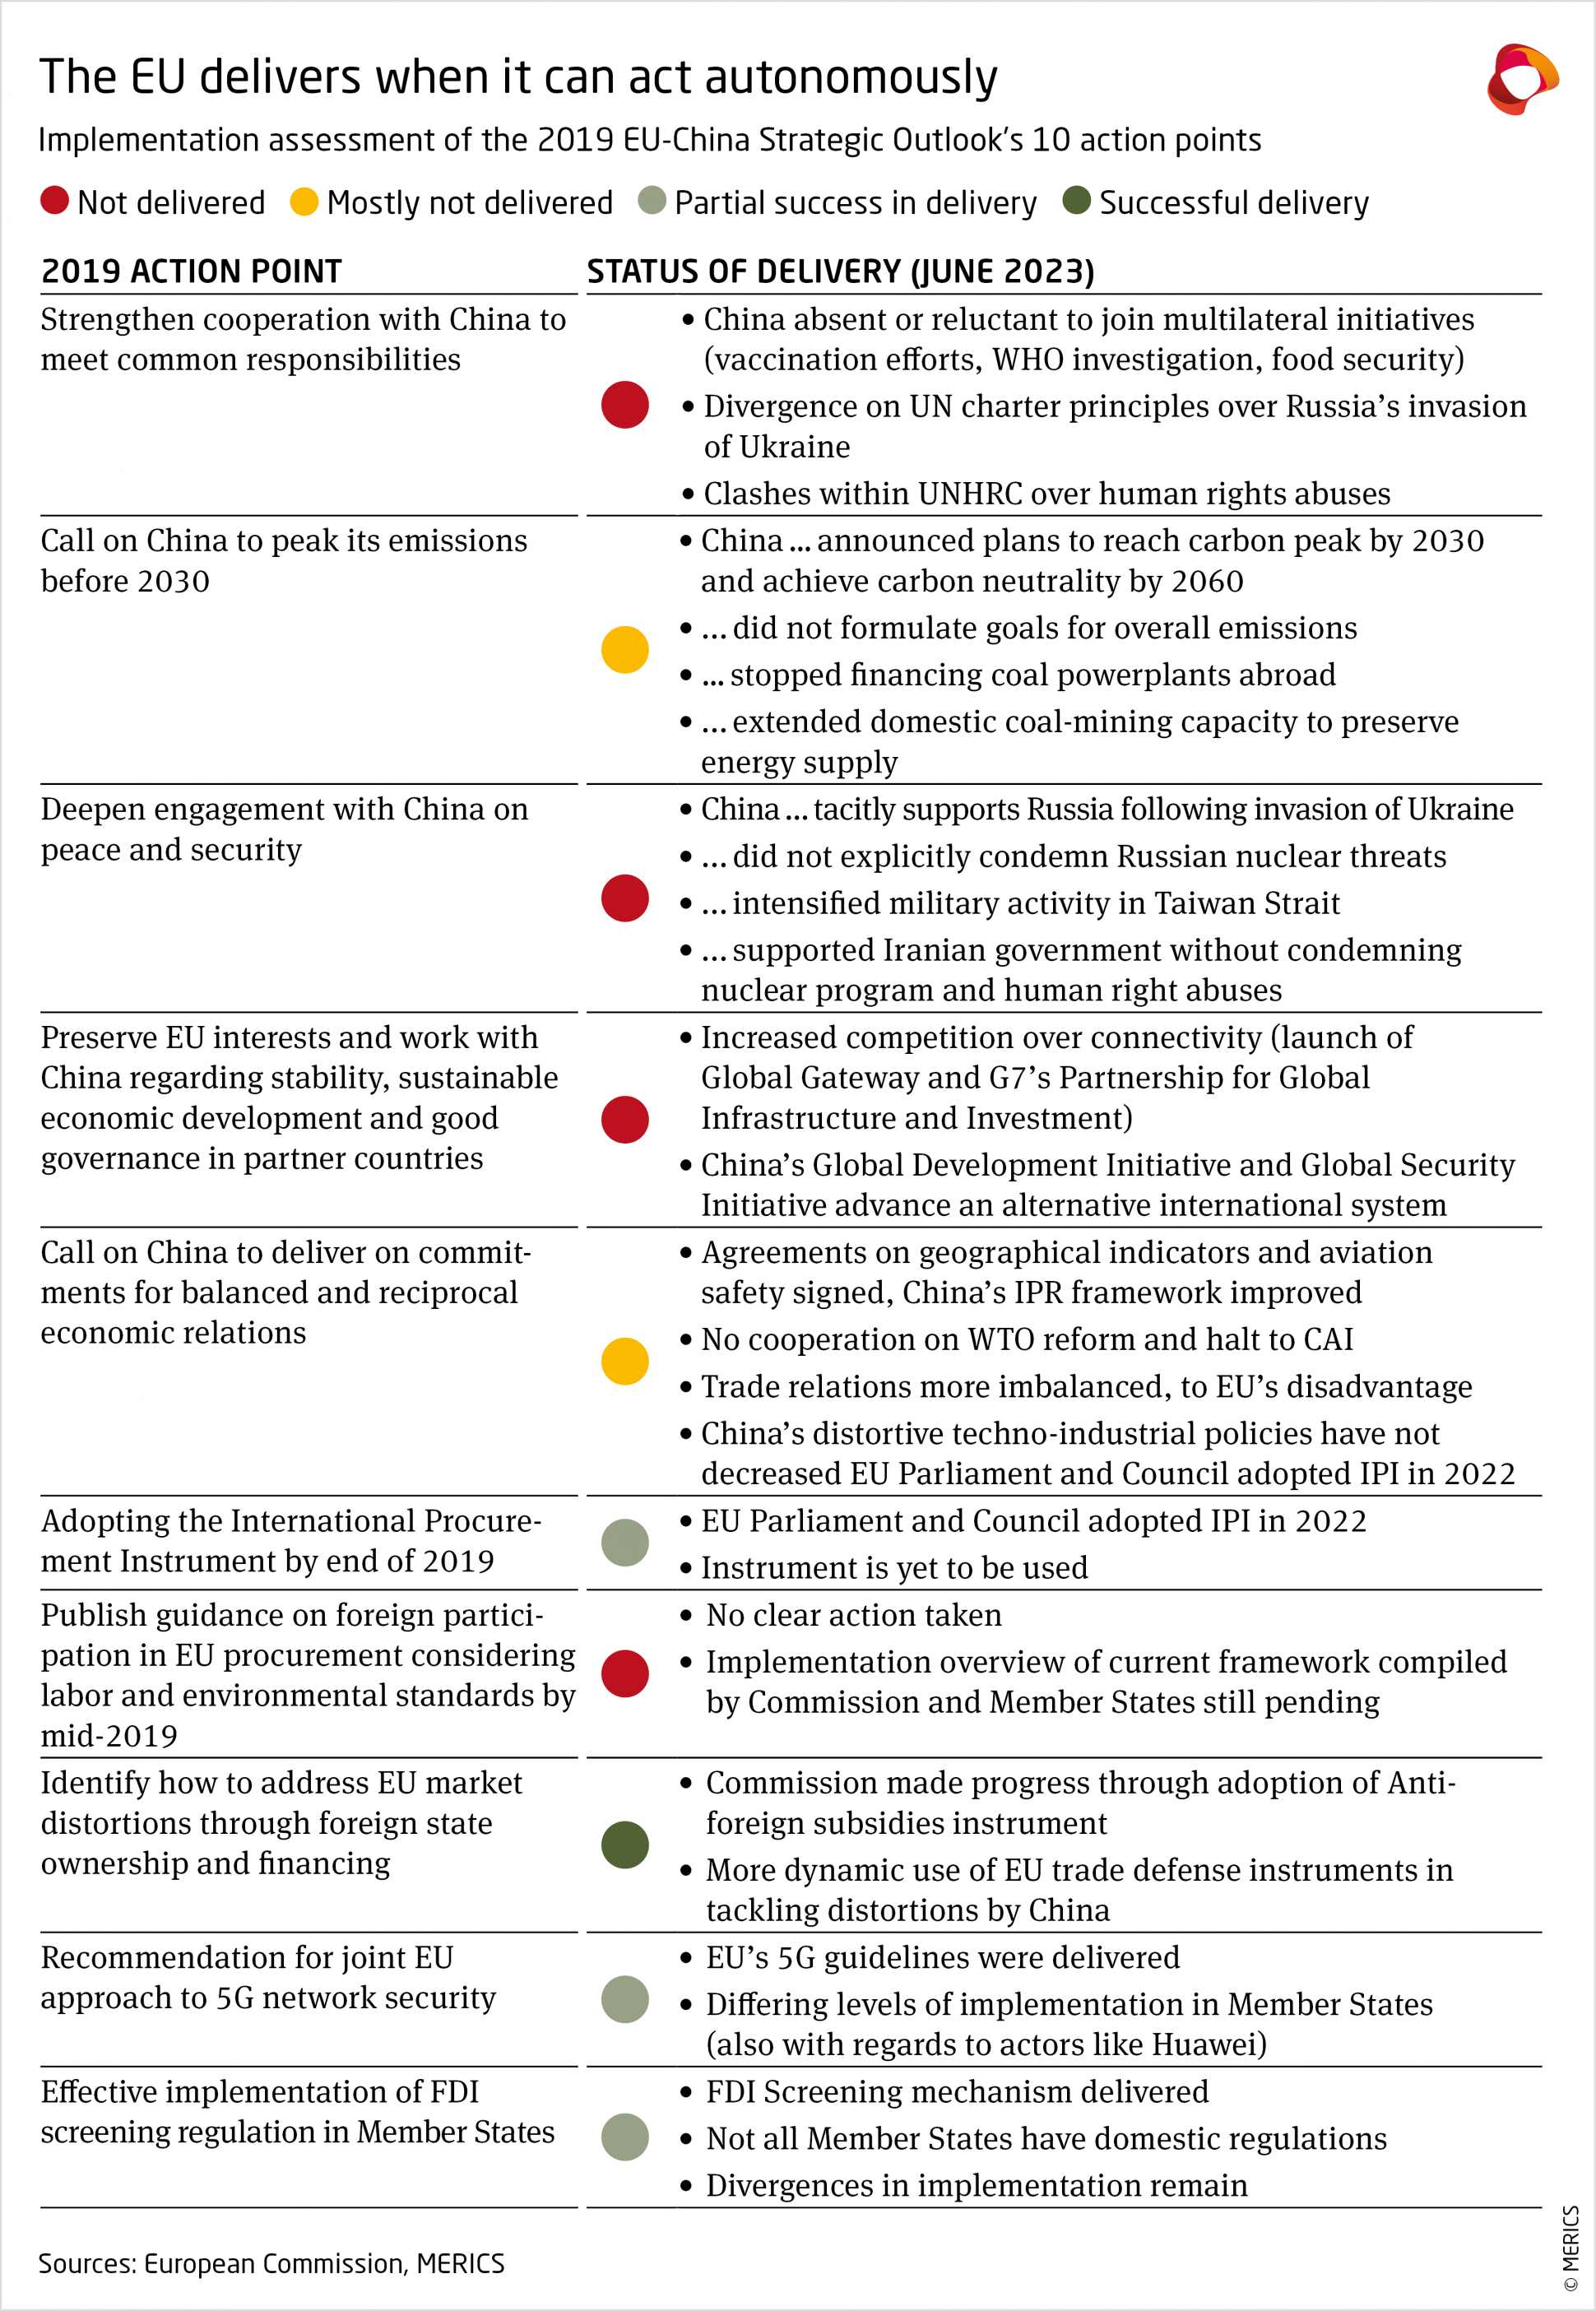 merics-implementation-assessment-of-the-2019-eu-china-strategic-outlook-action-points.png